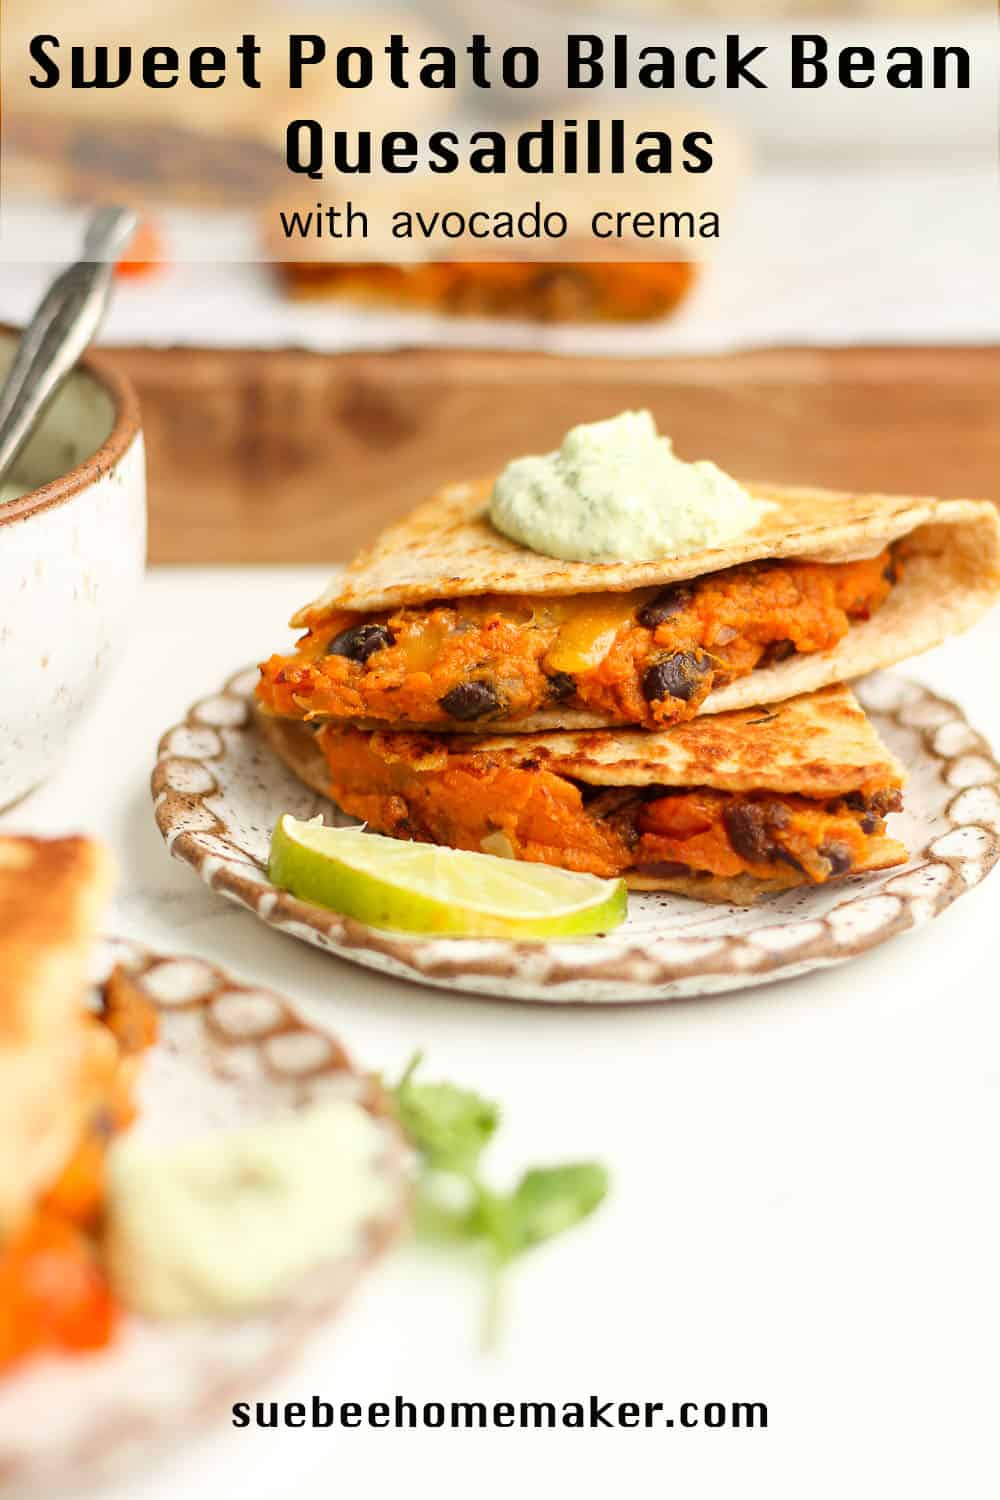 A plate of two stacked quesadillas with sweet potatoes and black beans.